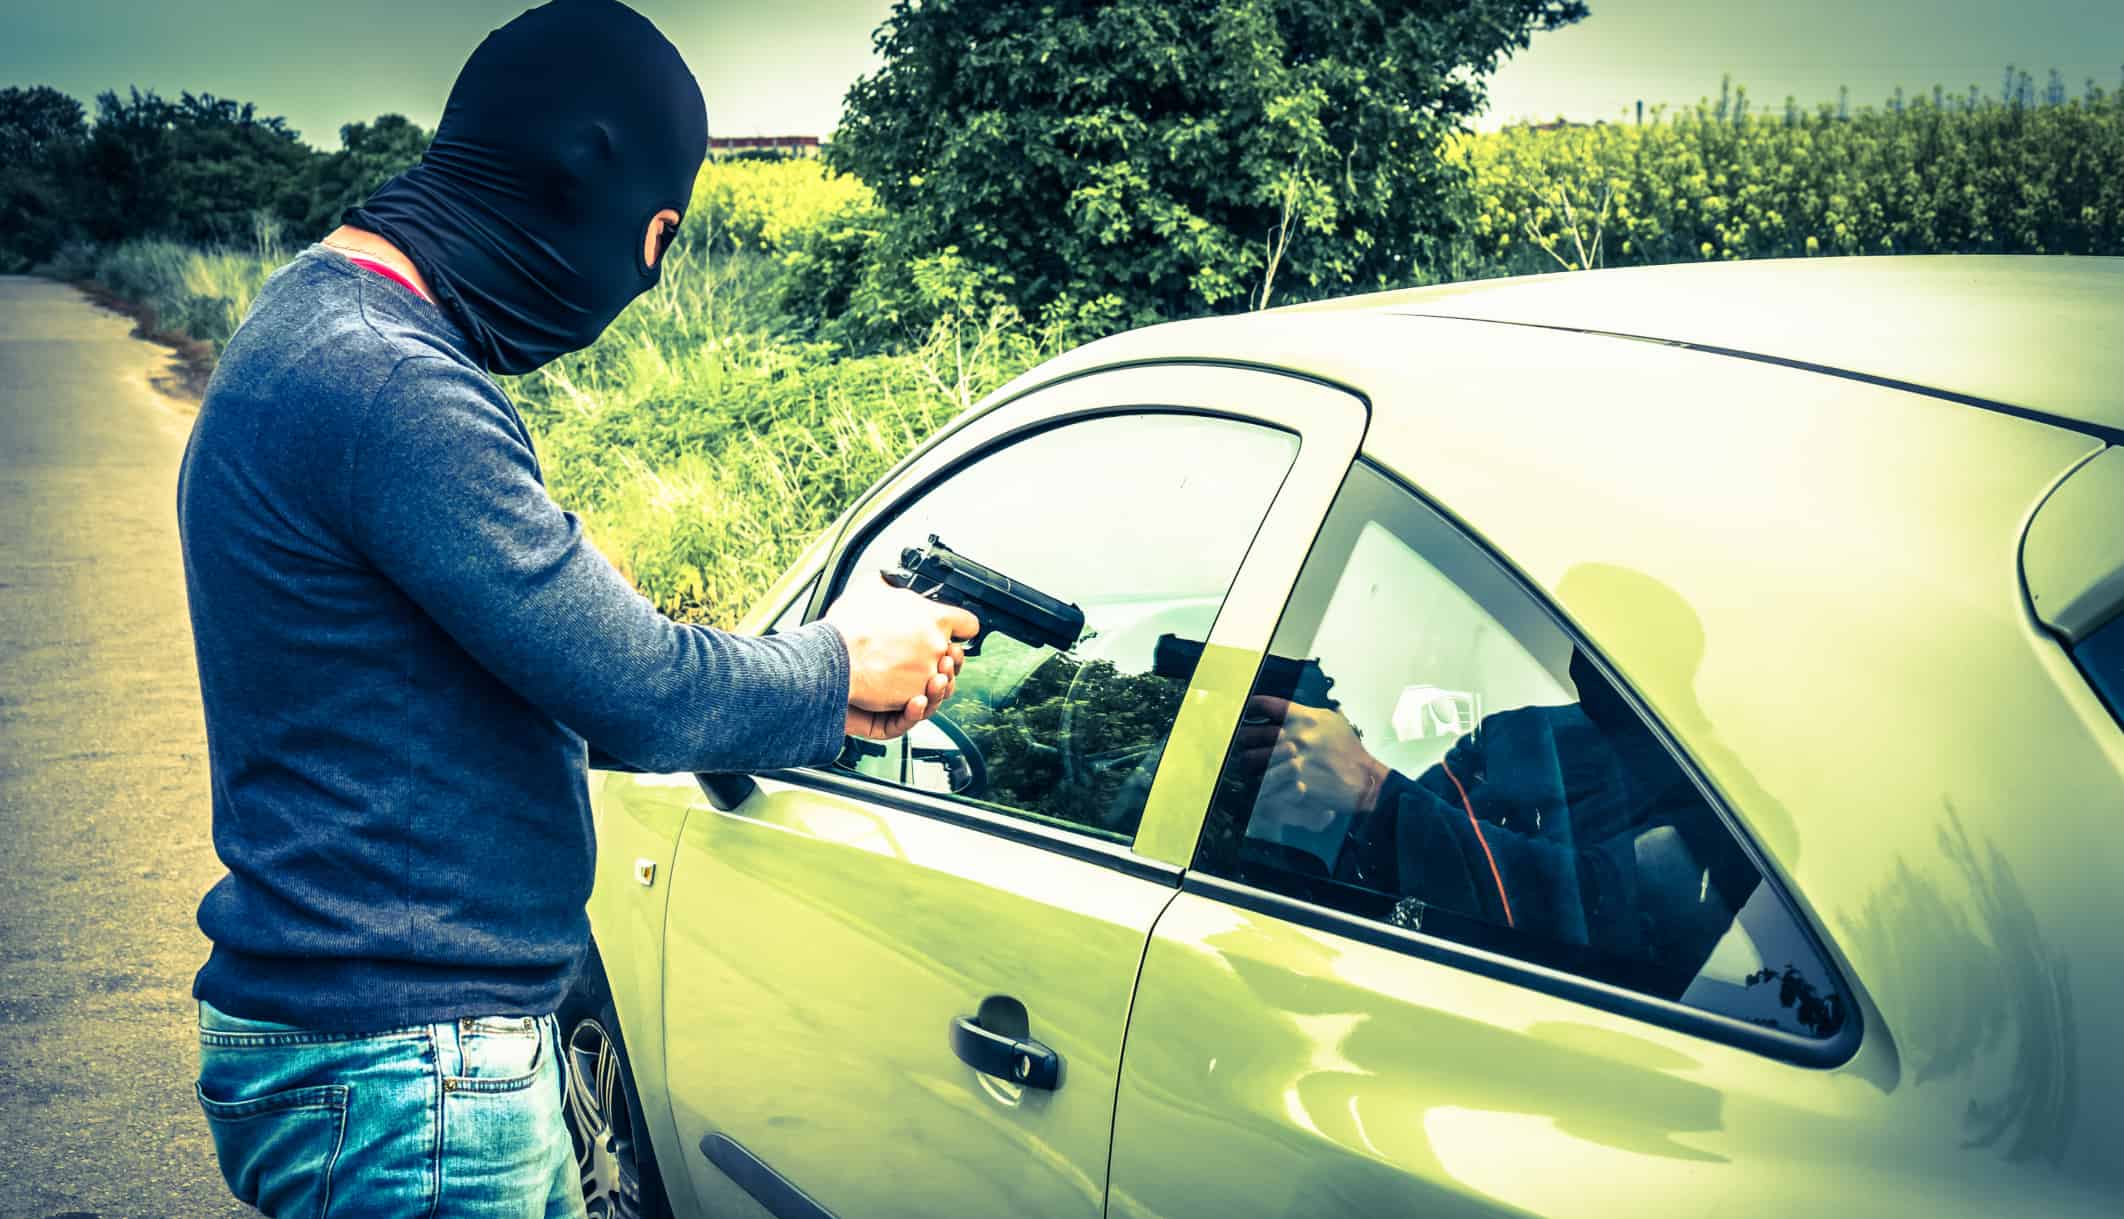 Shocking! Thieves drive off with car and the car owner’s wife after owner leaves keys inside